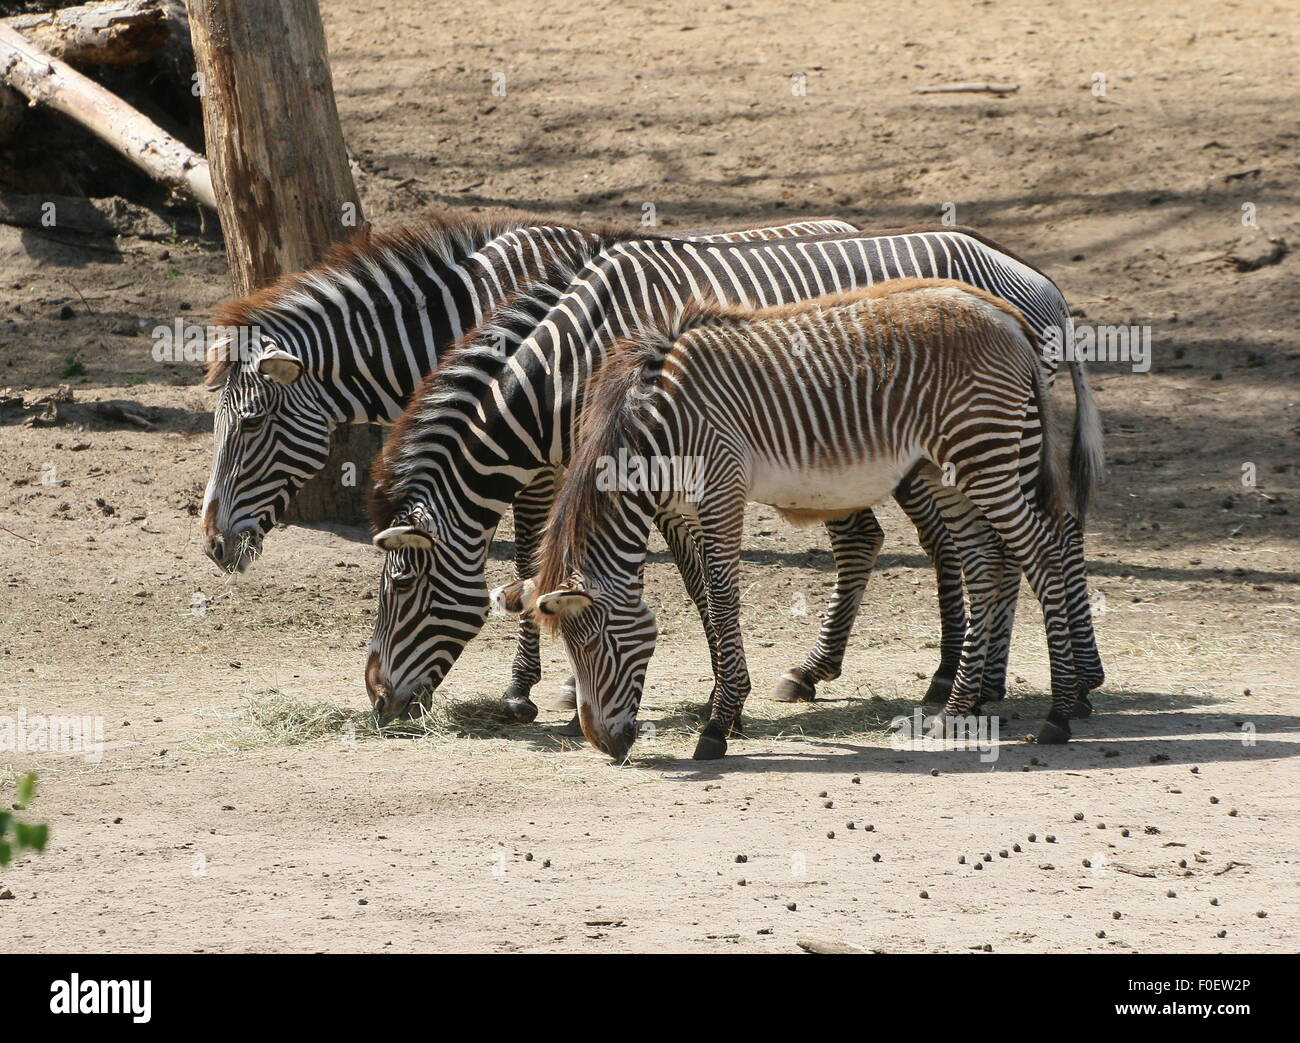 Group of three East African Grévy's zebras or Imperial zebras (Equus grevyi) feeding together Stock Photo